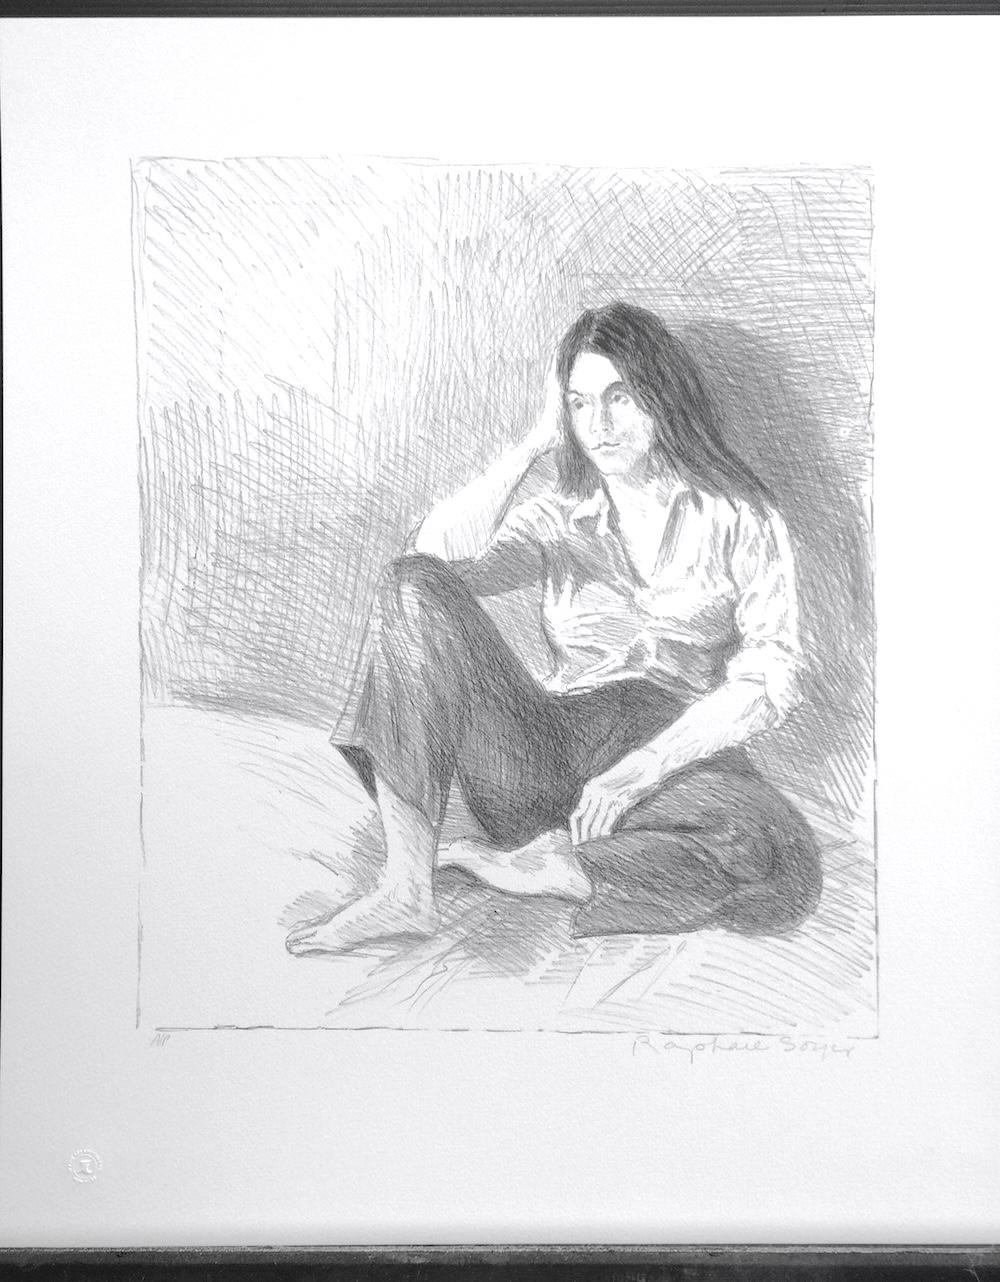 SEATED WOMAN BLUE JEANS is an original hand drawn (not digitally or photo reproduced) limited edition lithograph by the artist Raphael Soyer - Russian/American Social Realism Painter, 1899-1987. Printed using traditional hand lithography techniques